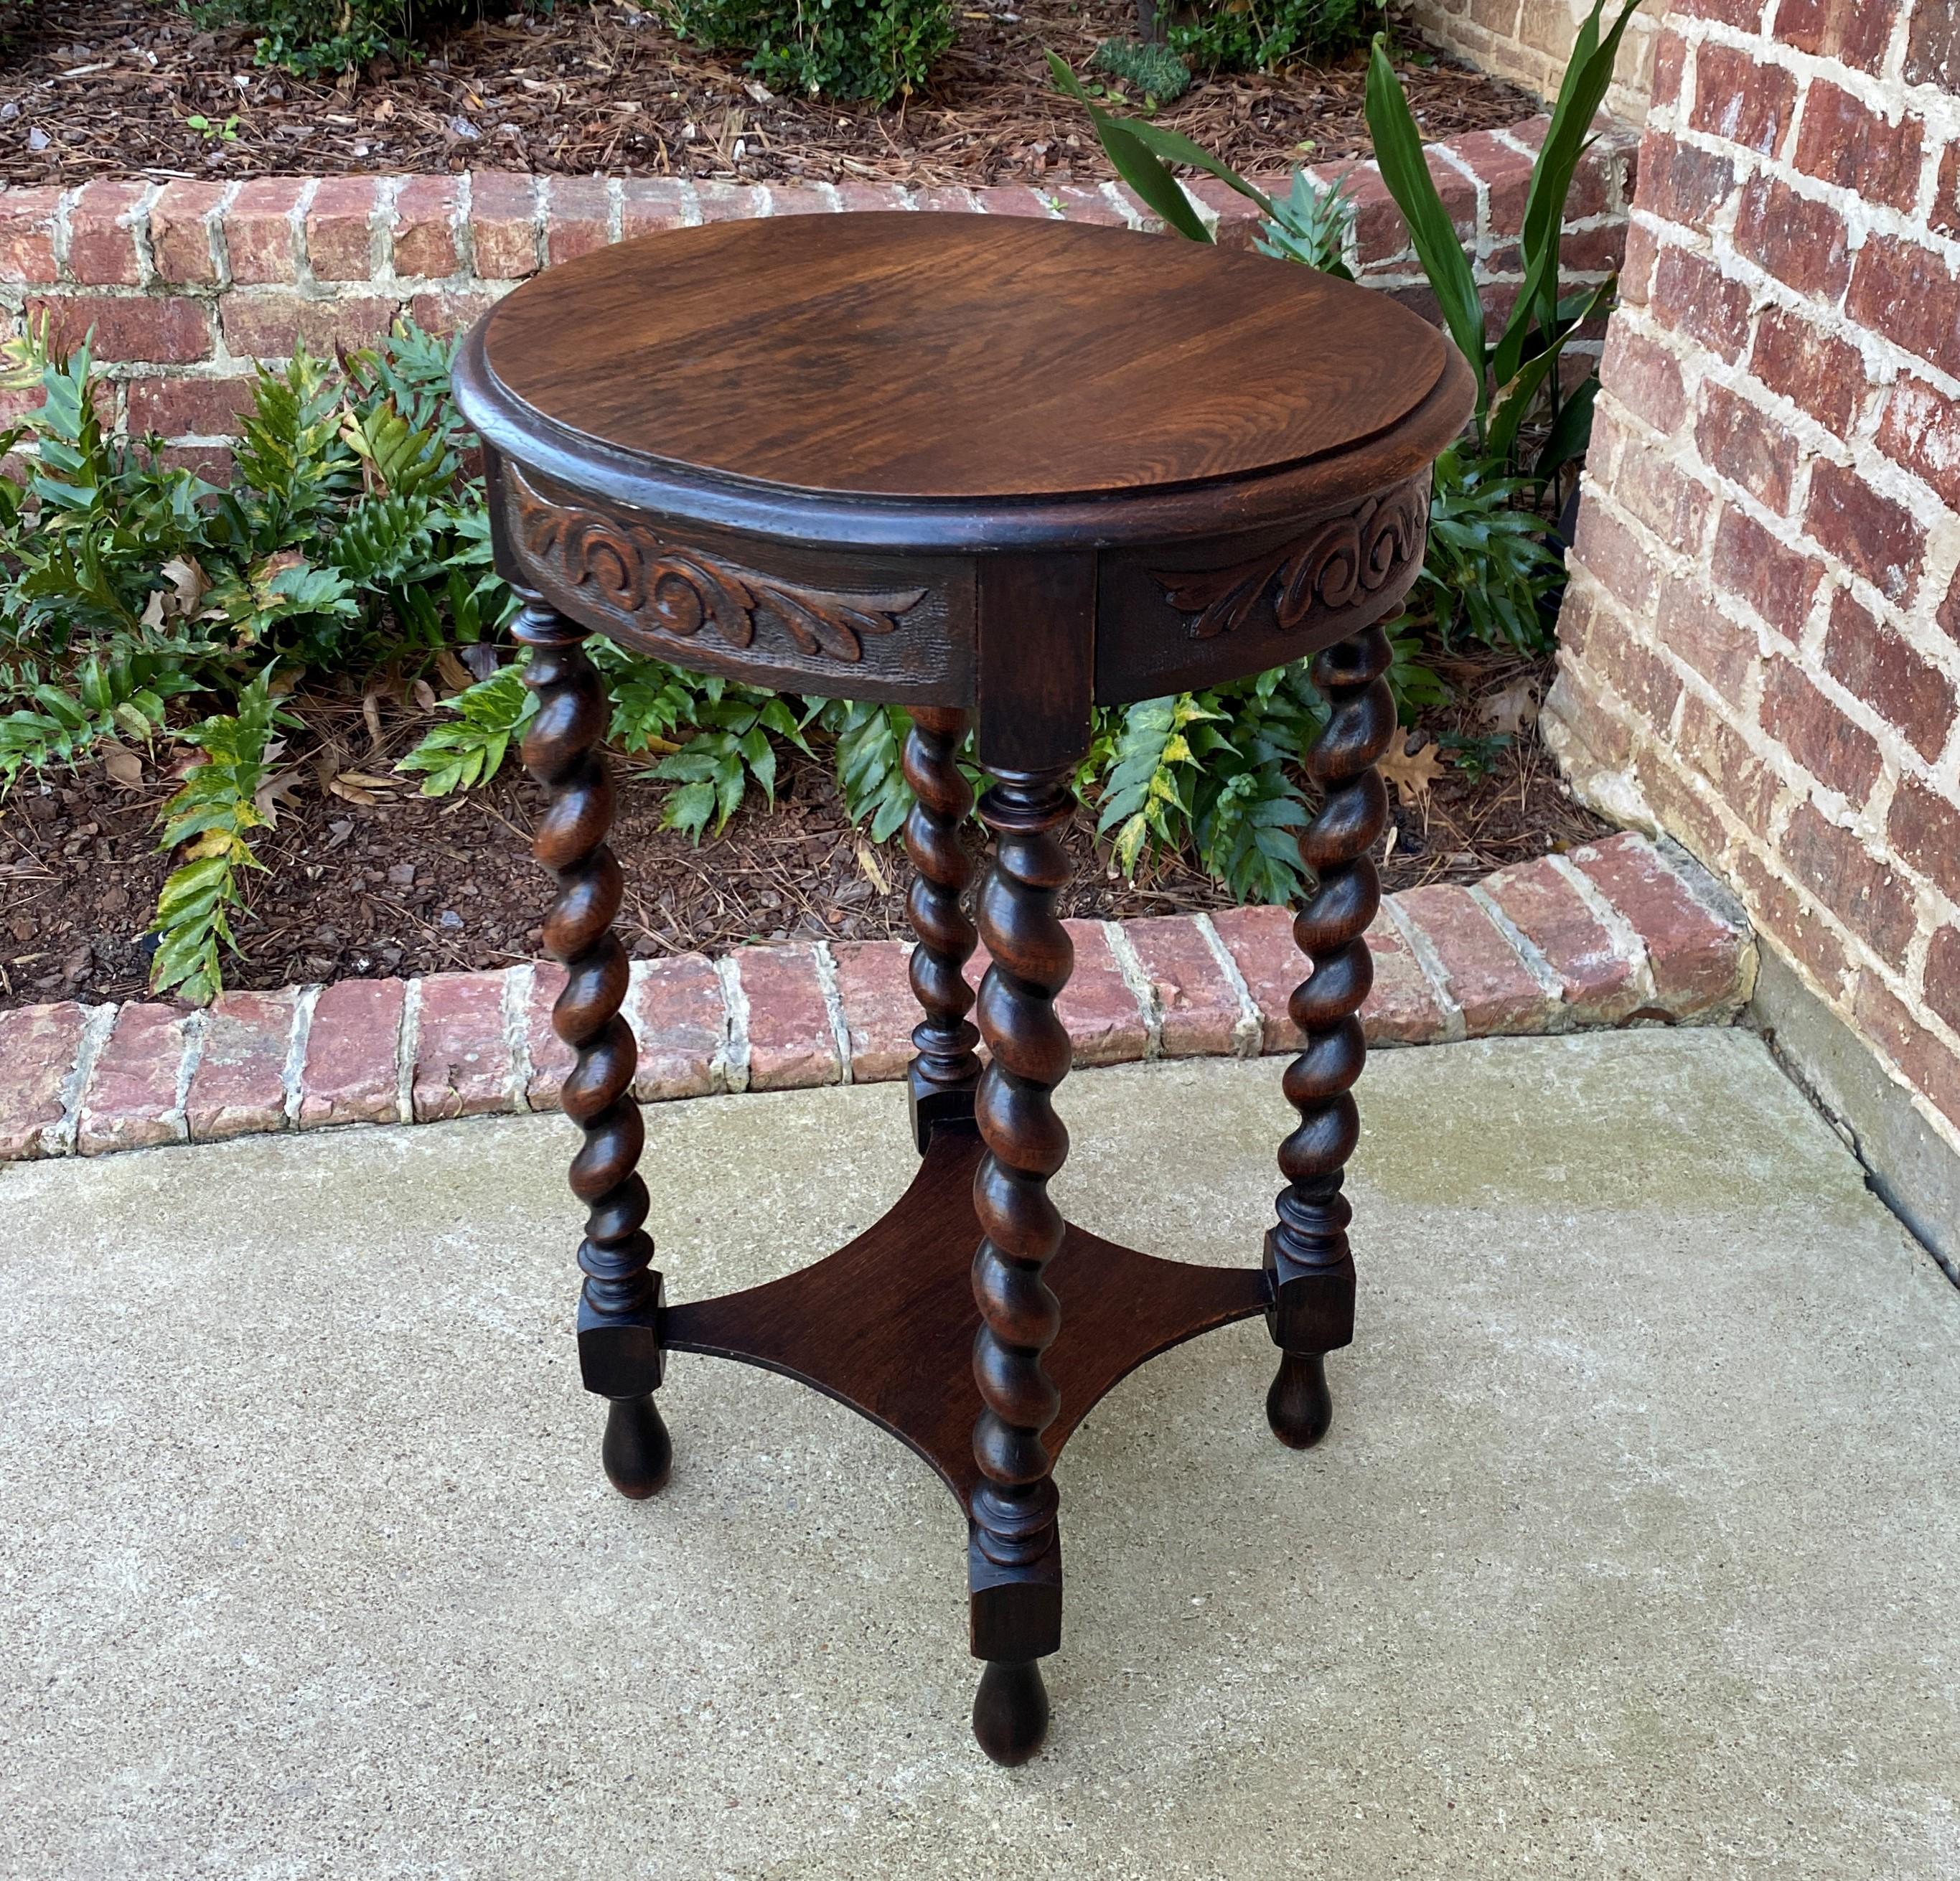 Antique English Round Table End Table Occasional Table Barley Twist Oak 2-Tier 1